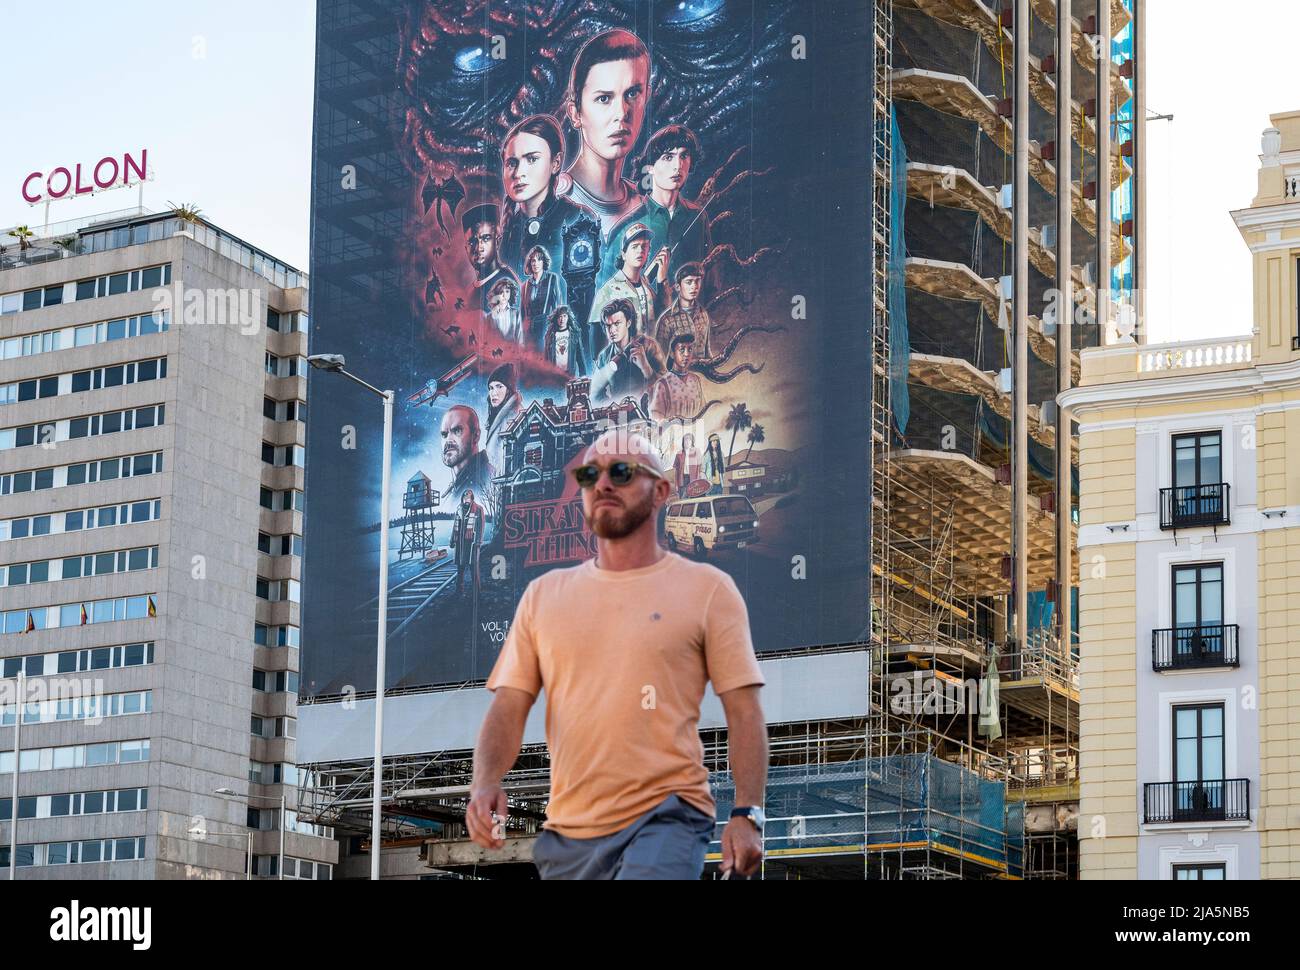 Madrid, Spain. 28th May, 2022. A pedestrian walks past a large street advertisement billboard from the American global on-demand Internet streaming media provider Netflix featuring Stranger Things Season 4 TV show in Spain. Credit: SOPA Images Limited/Alamy Live News Stock Photo